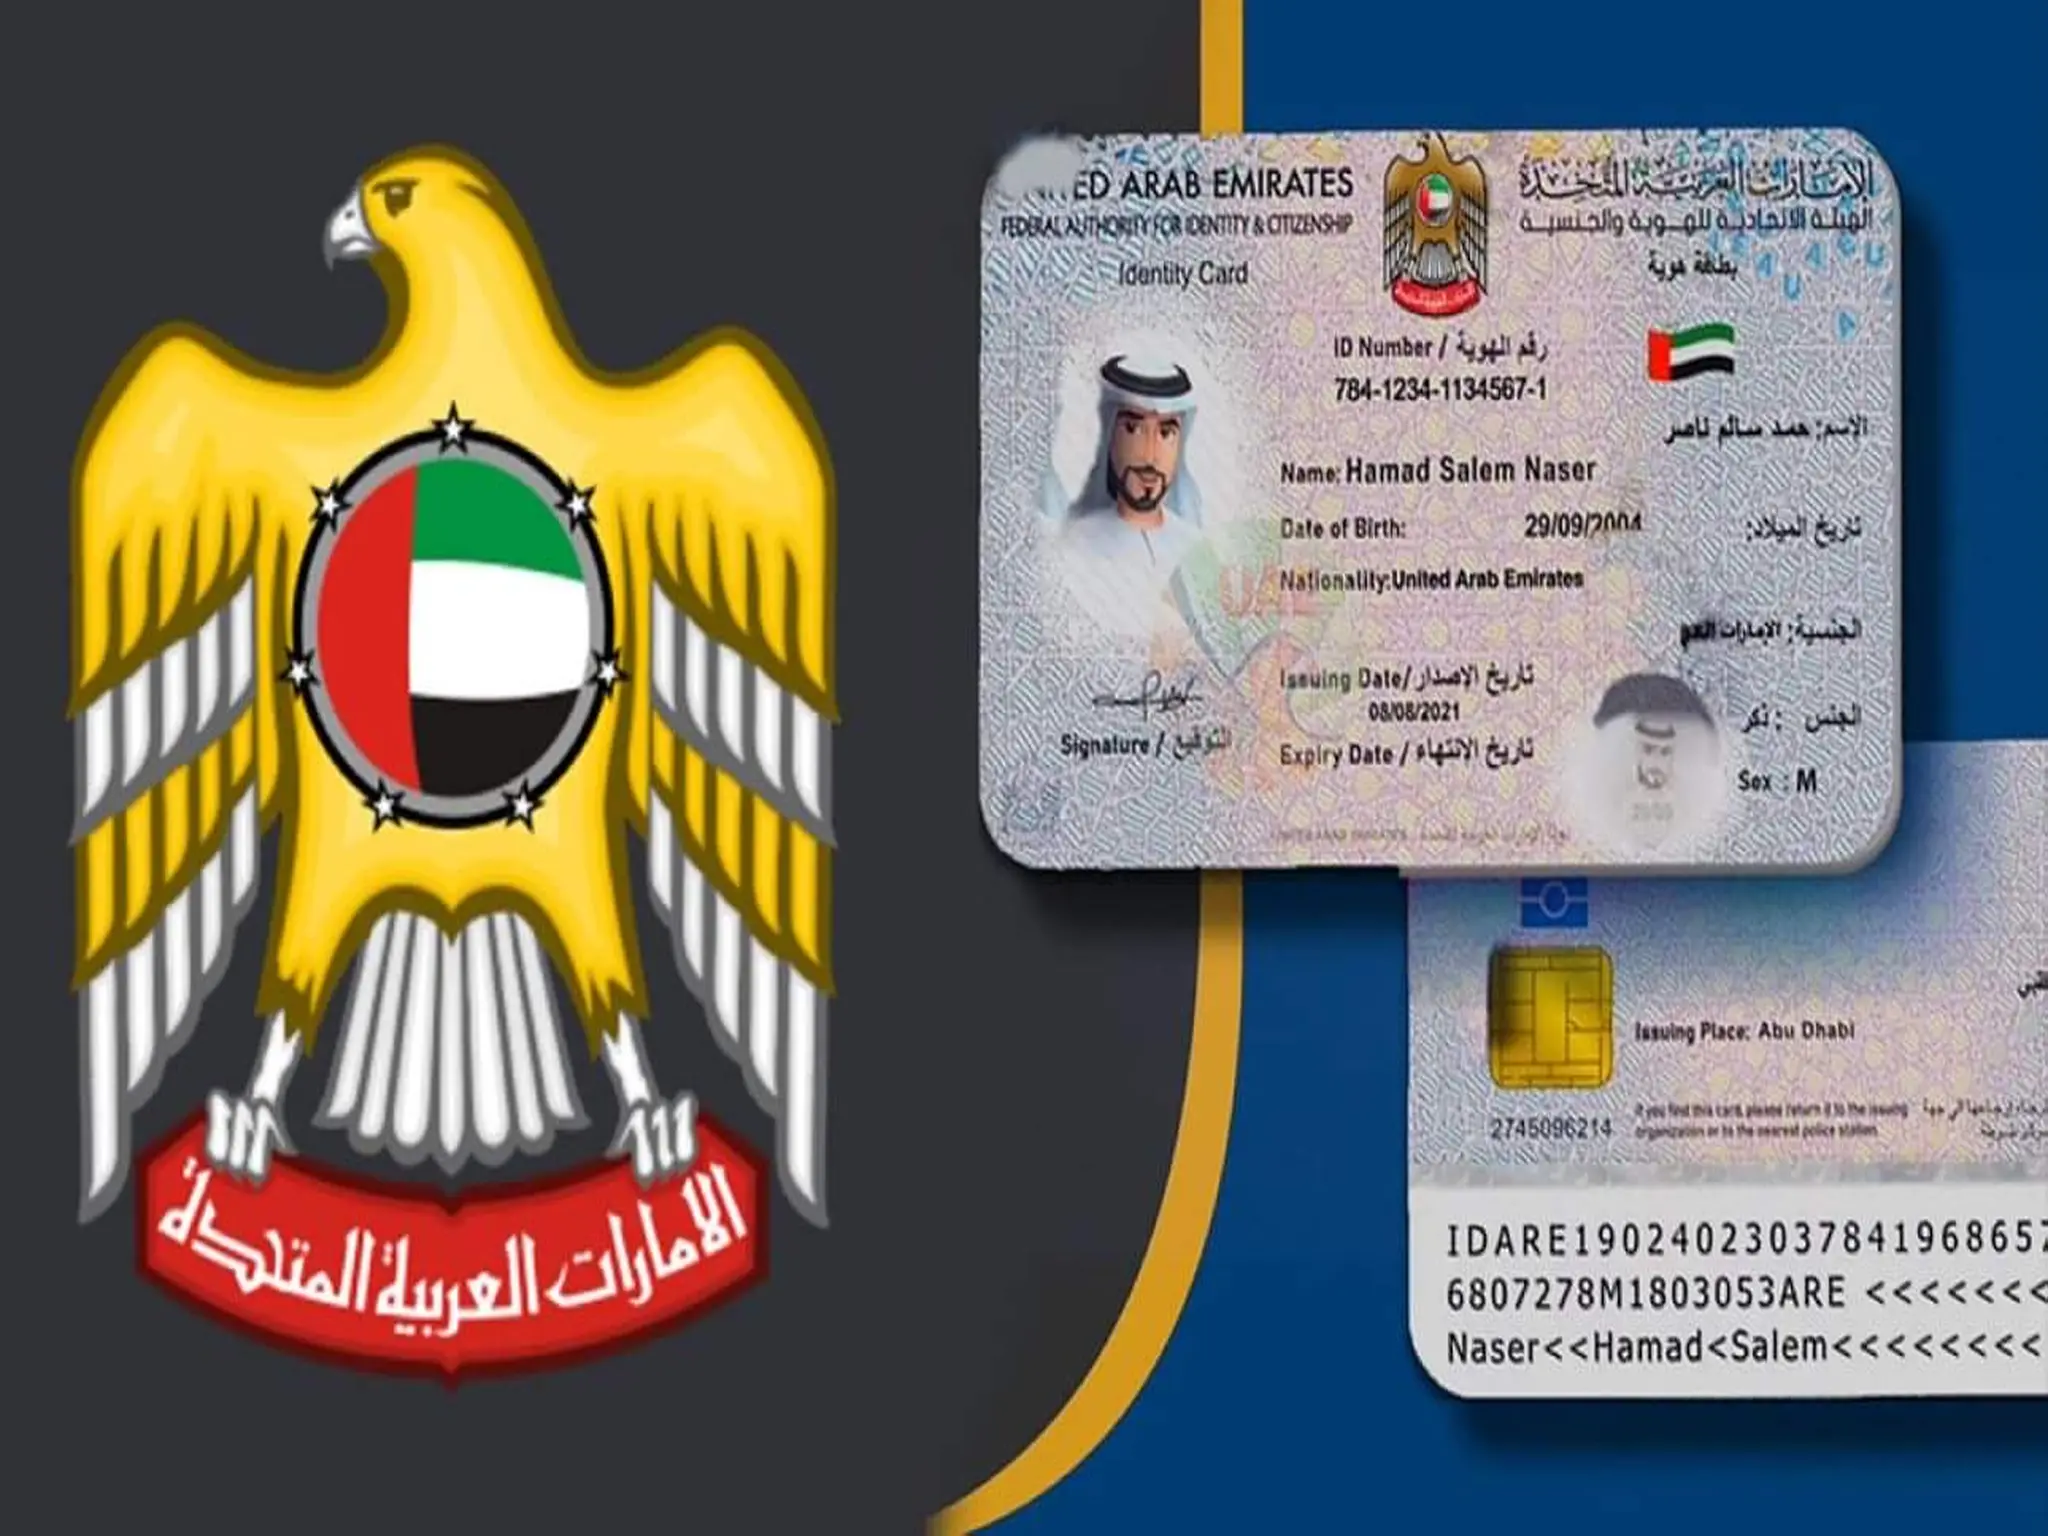 A statement from the Federal Authority for Identity and Citizenship regarding the ID card